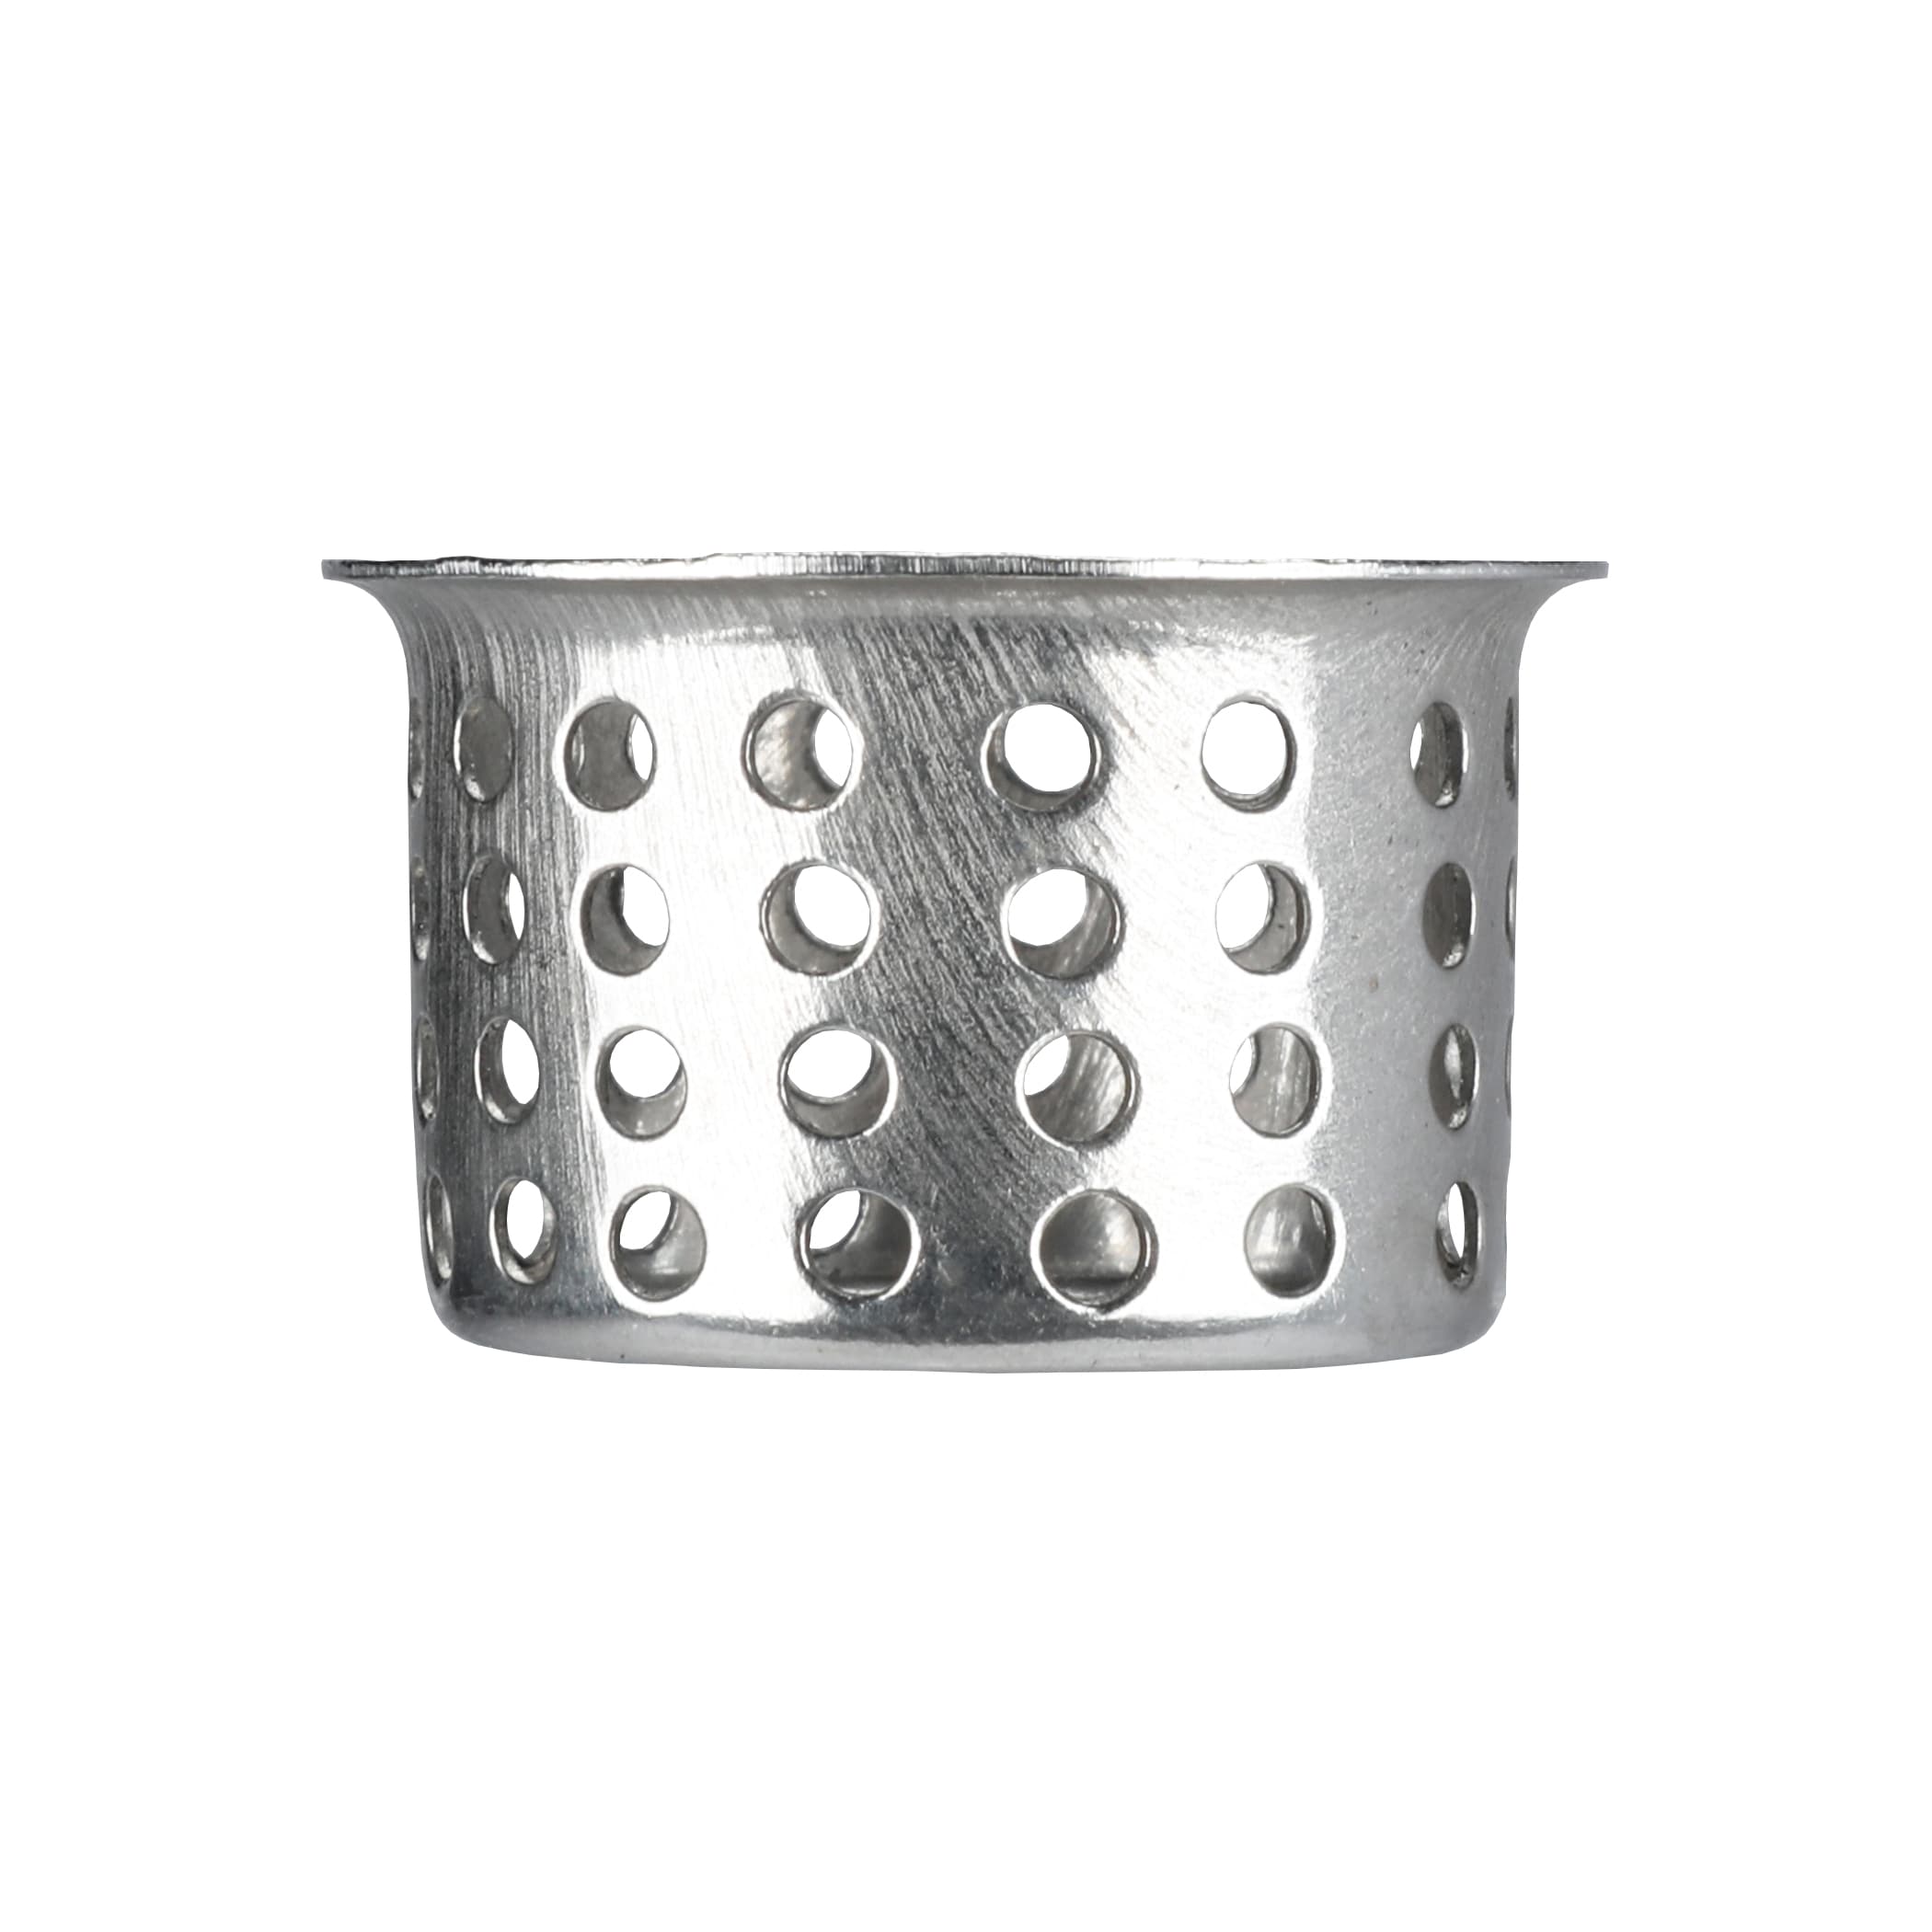 Lasco 3-5/8 In. Stainless Steel Mesh Shower Drain Strainer with Chrome Rim  - Stanford Home Centers